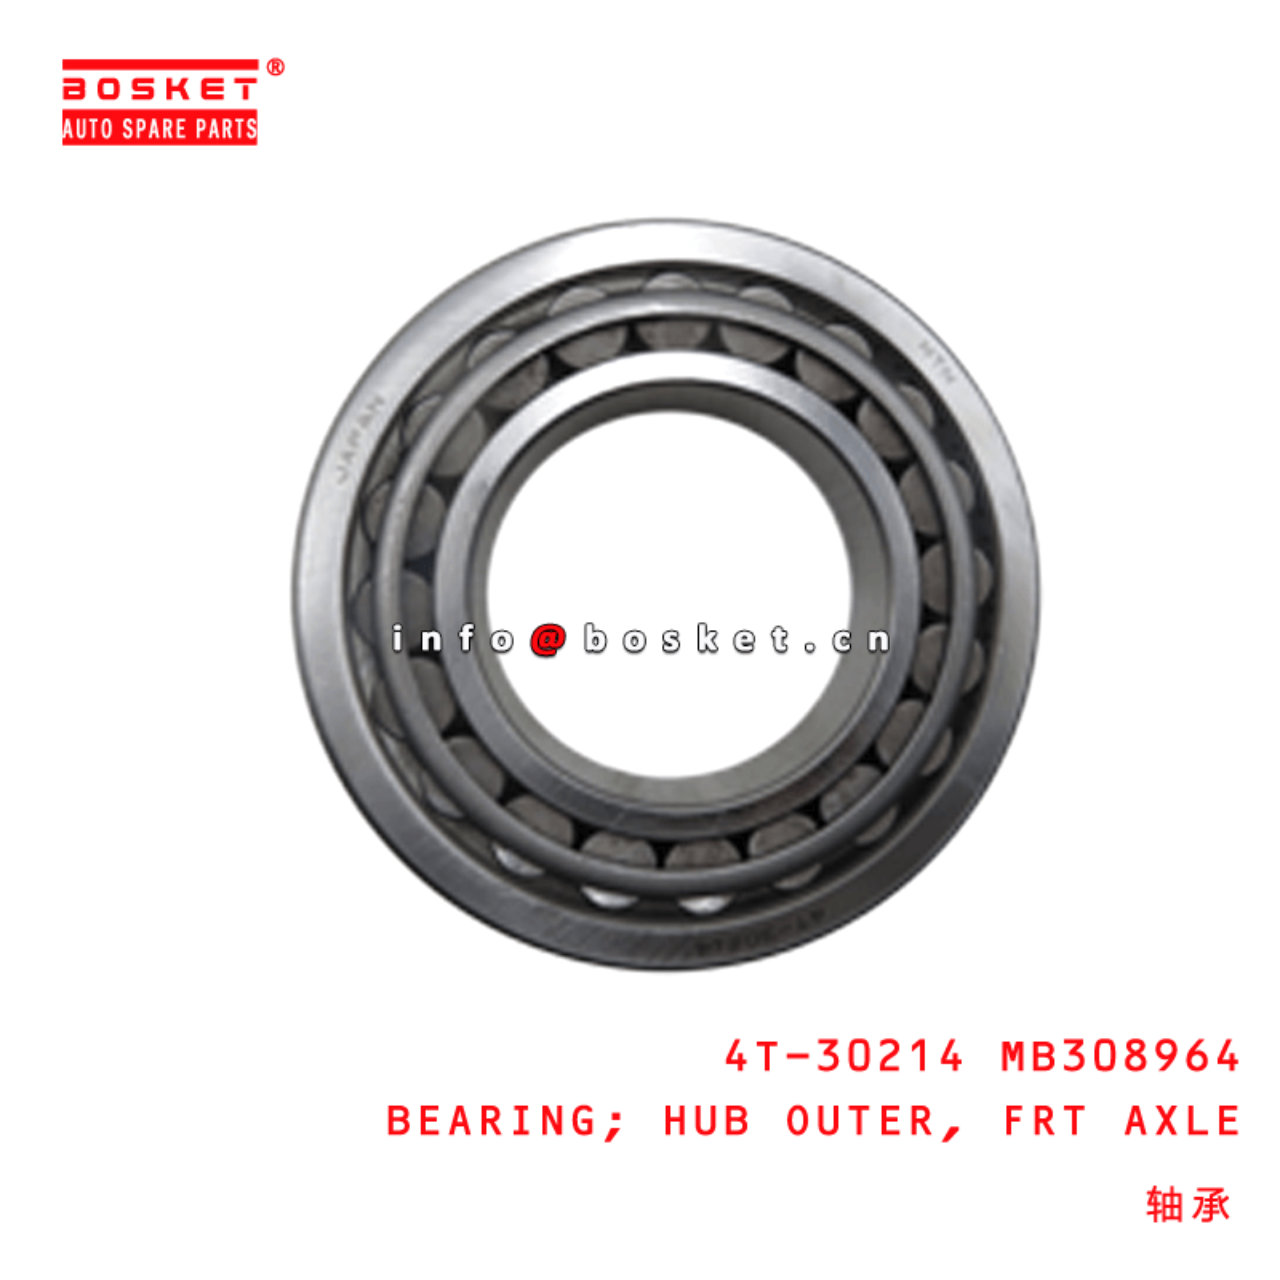 4T-30214 MB308964 Front Axle Hub Outer Bearing Suitable For FUSO CANTER RUS